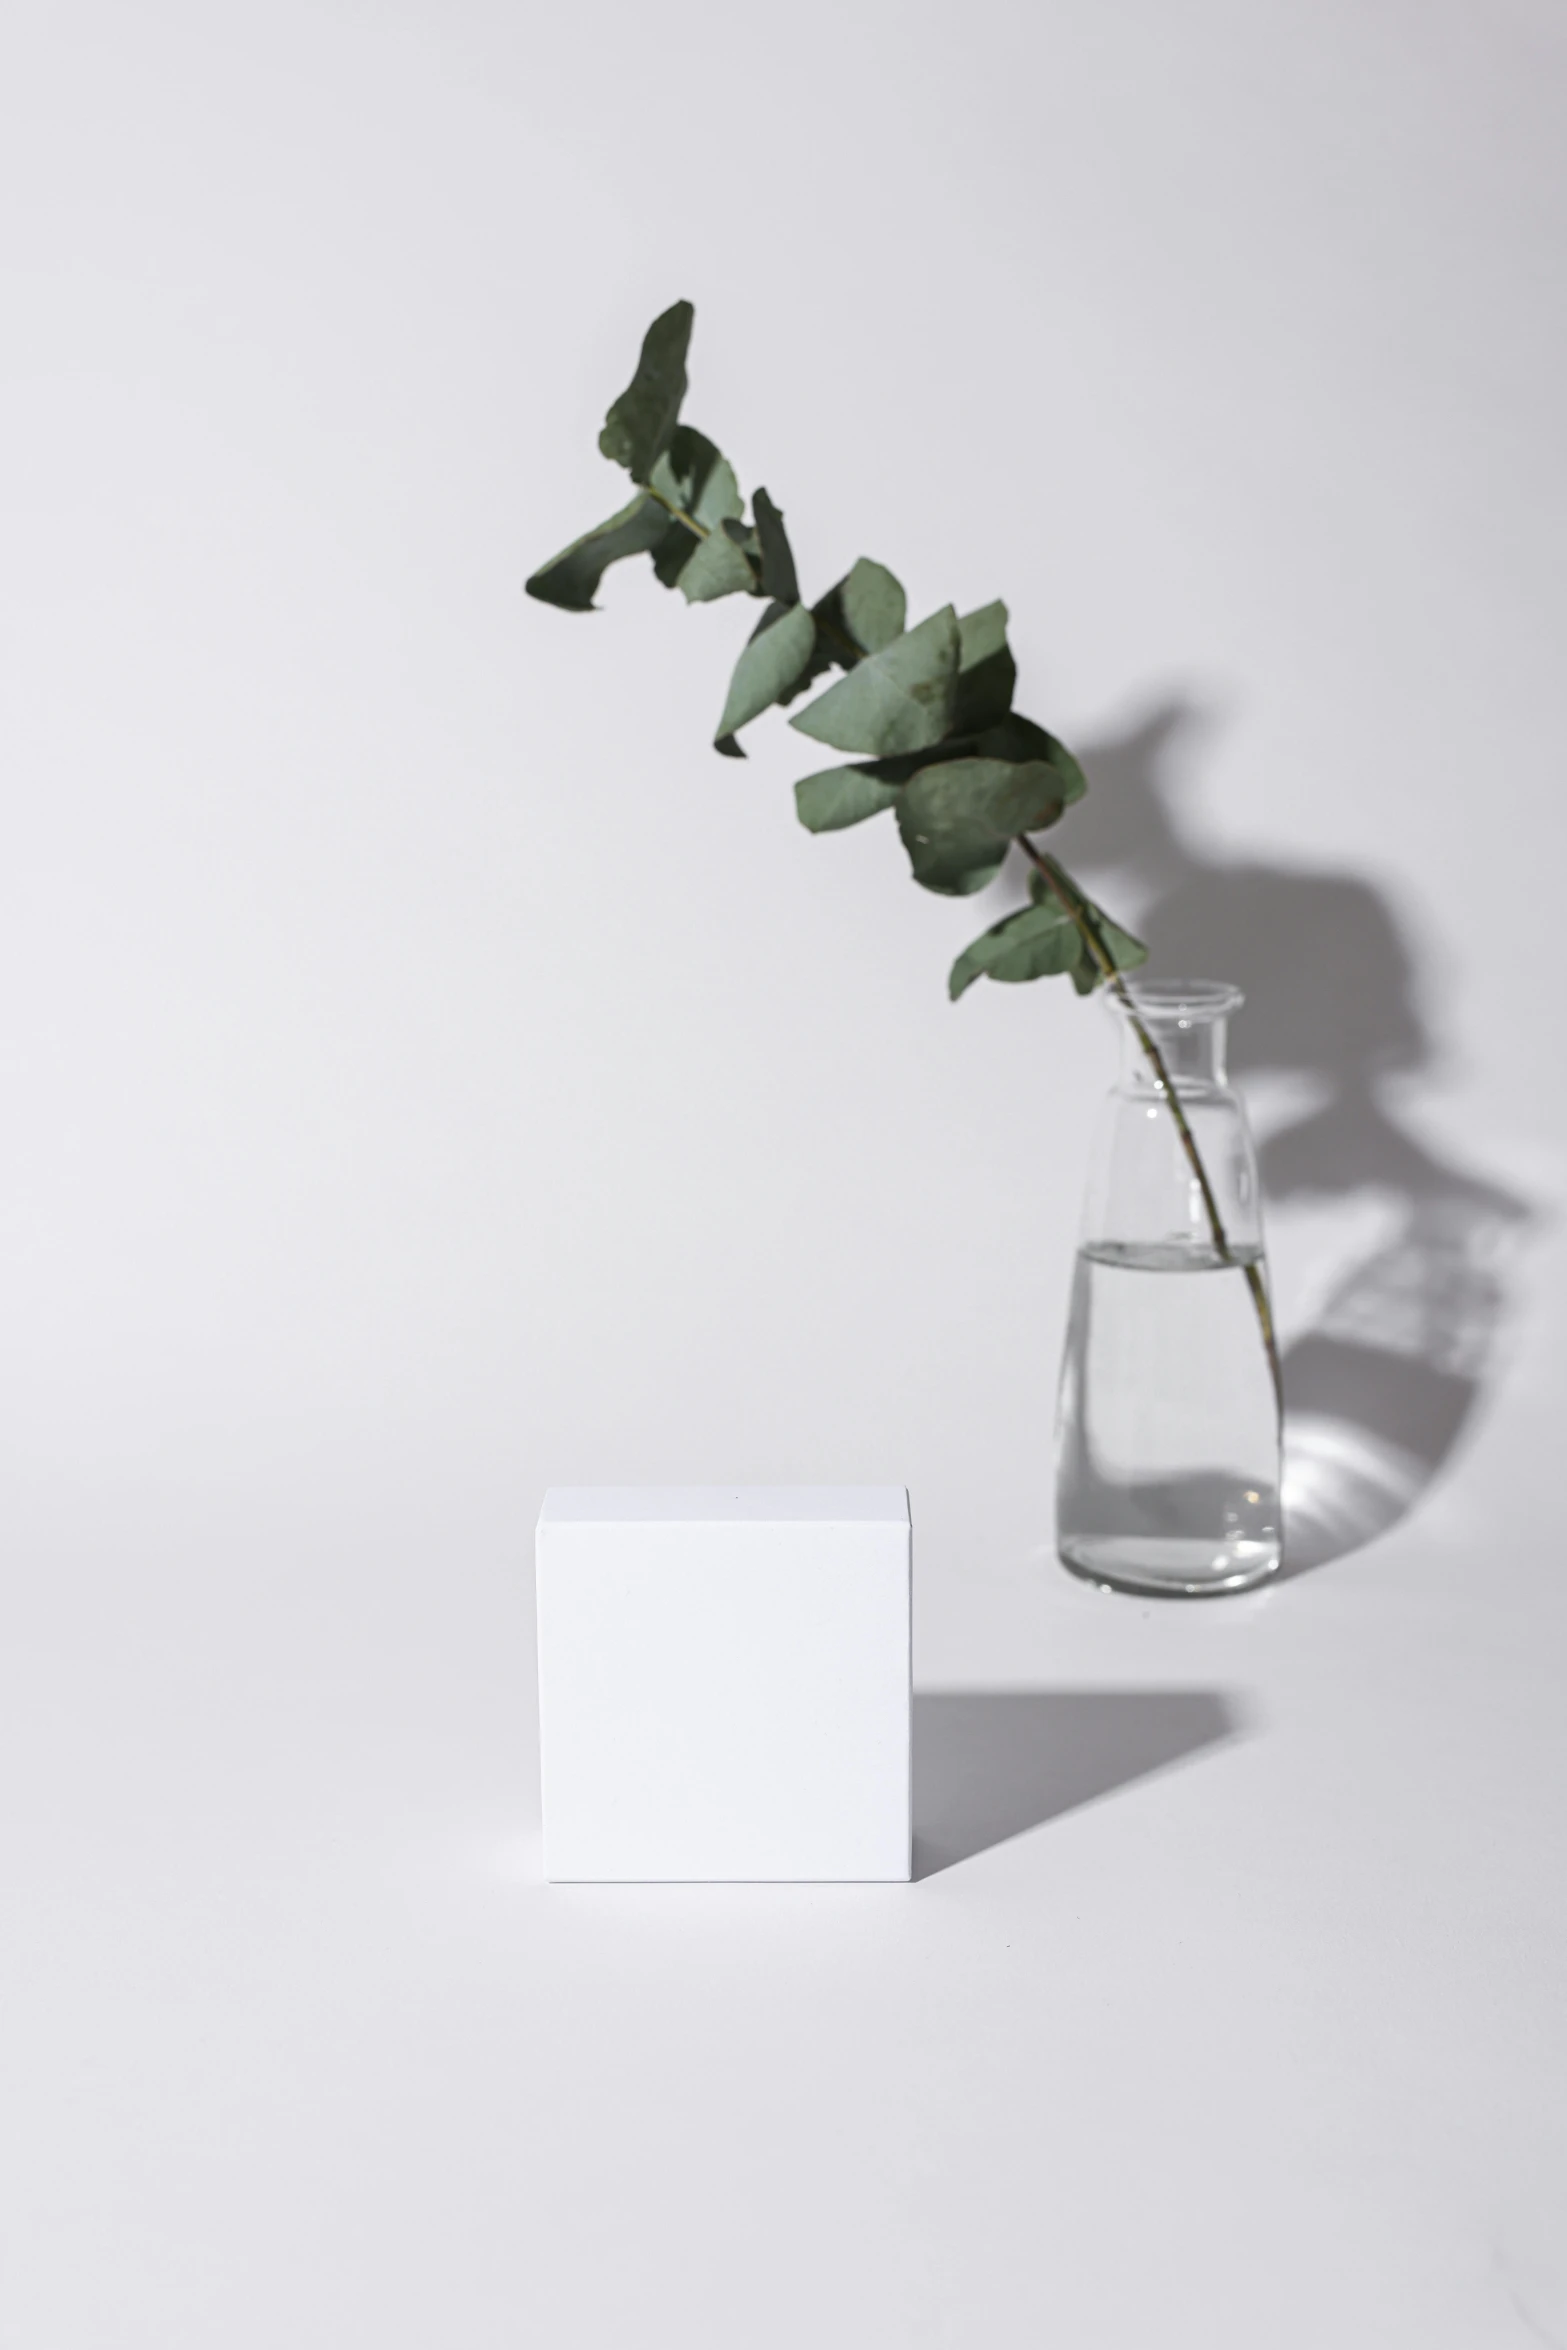 a close up of a vase with a plant in it, inspired by Robert Mapplethorpe, minimalism, translucent cube, white box, product introduction photo, square facial structure